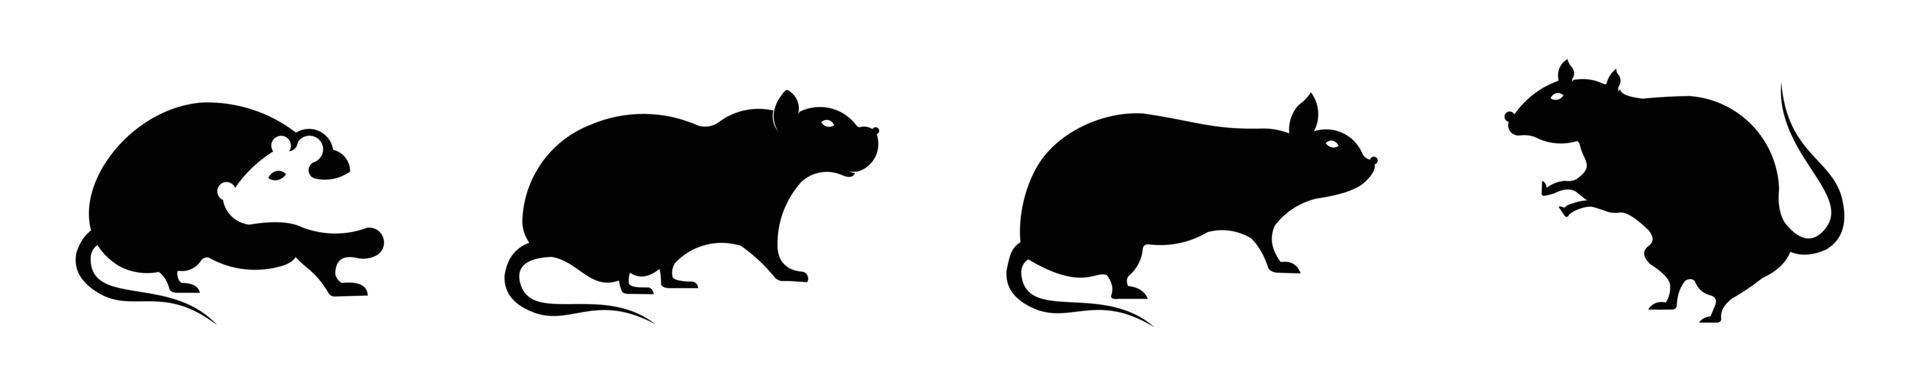 Set of rats silhouettes,mouse silhouette icon vector set for logo